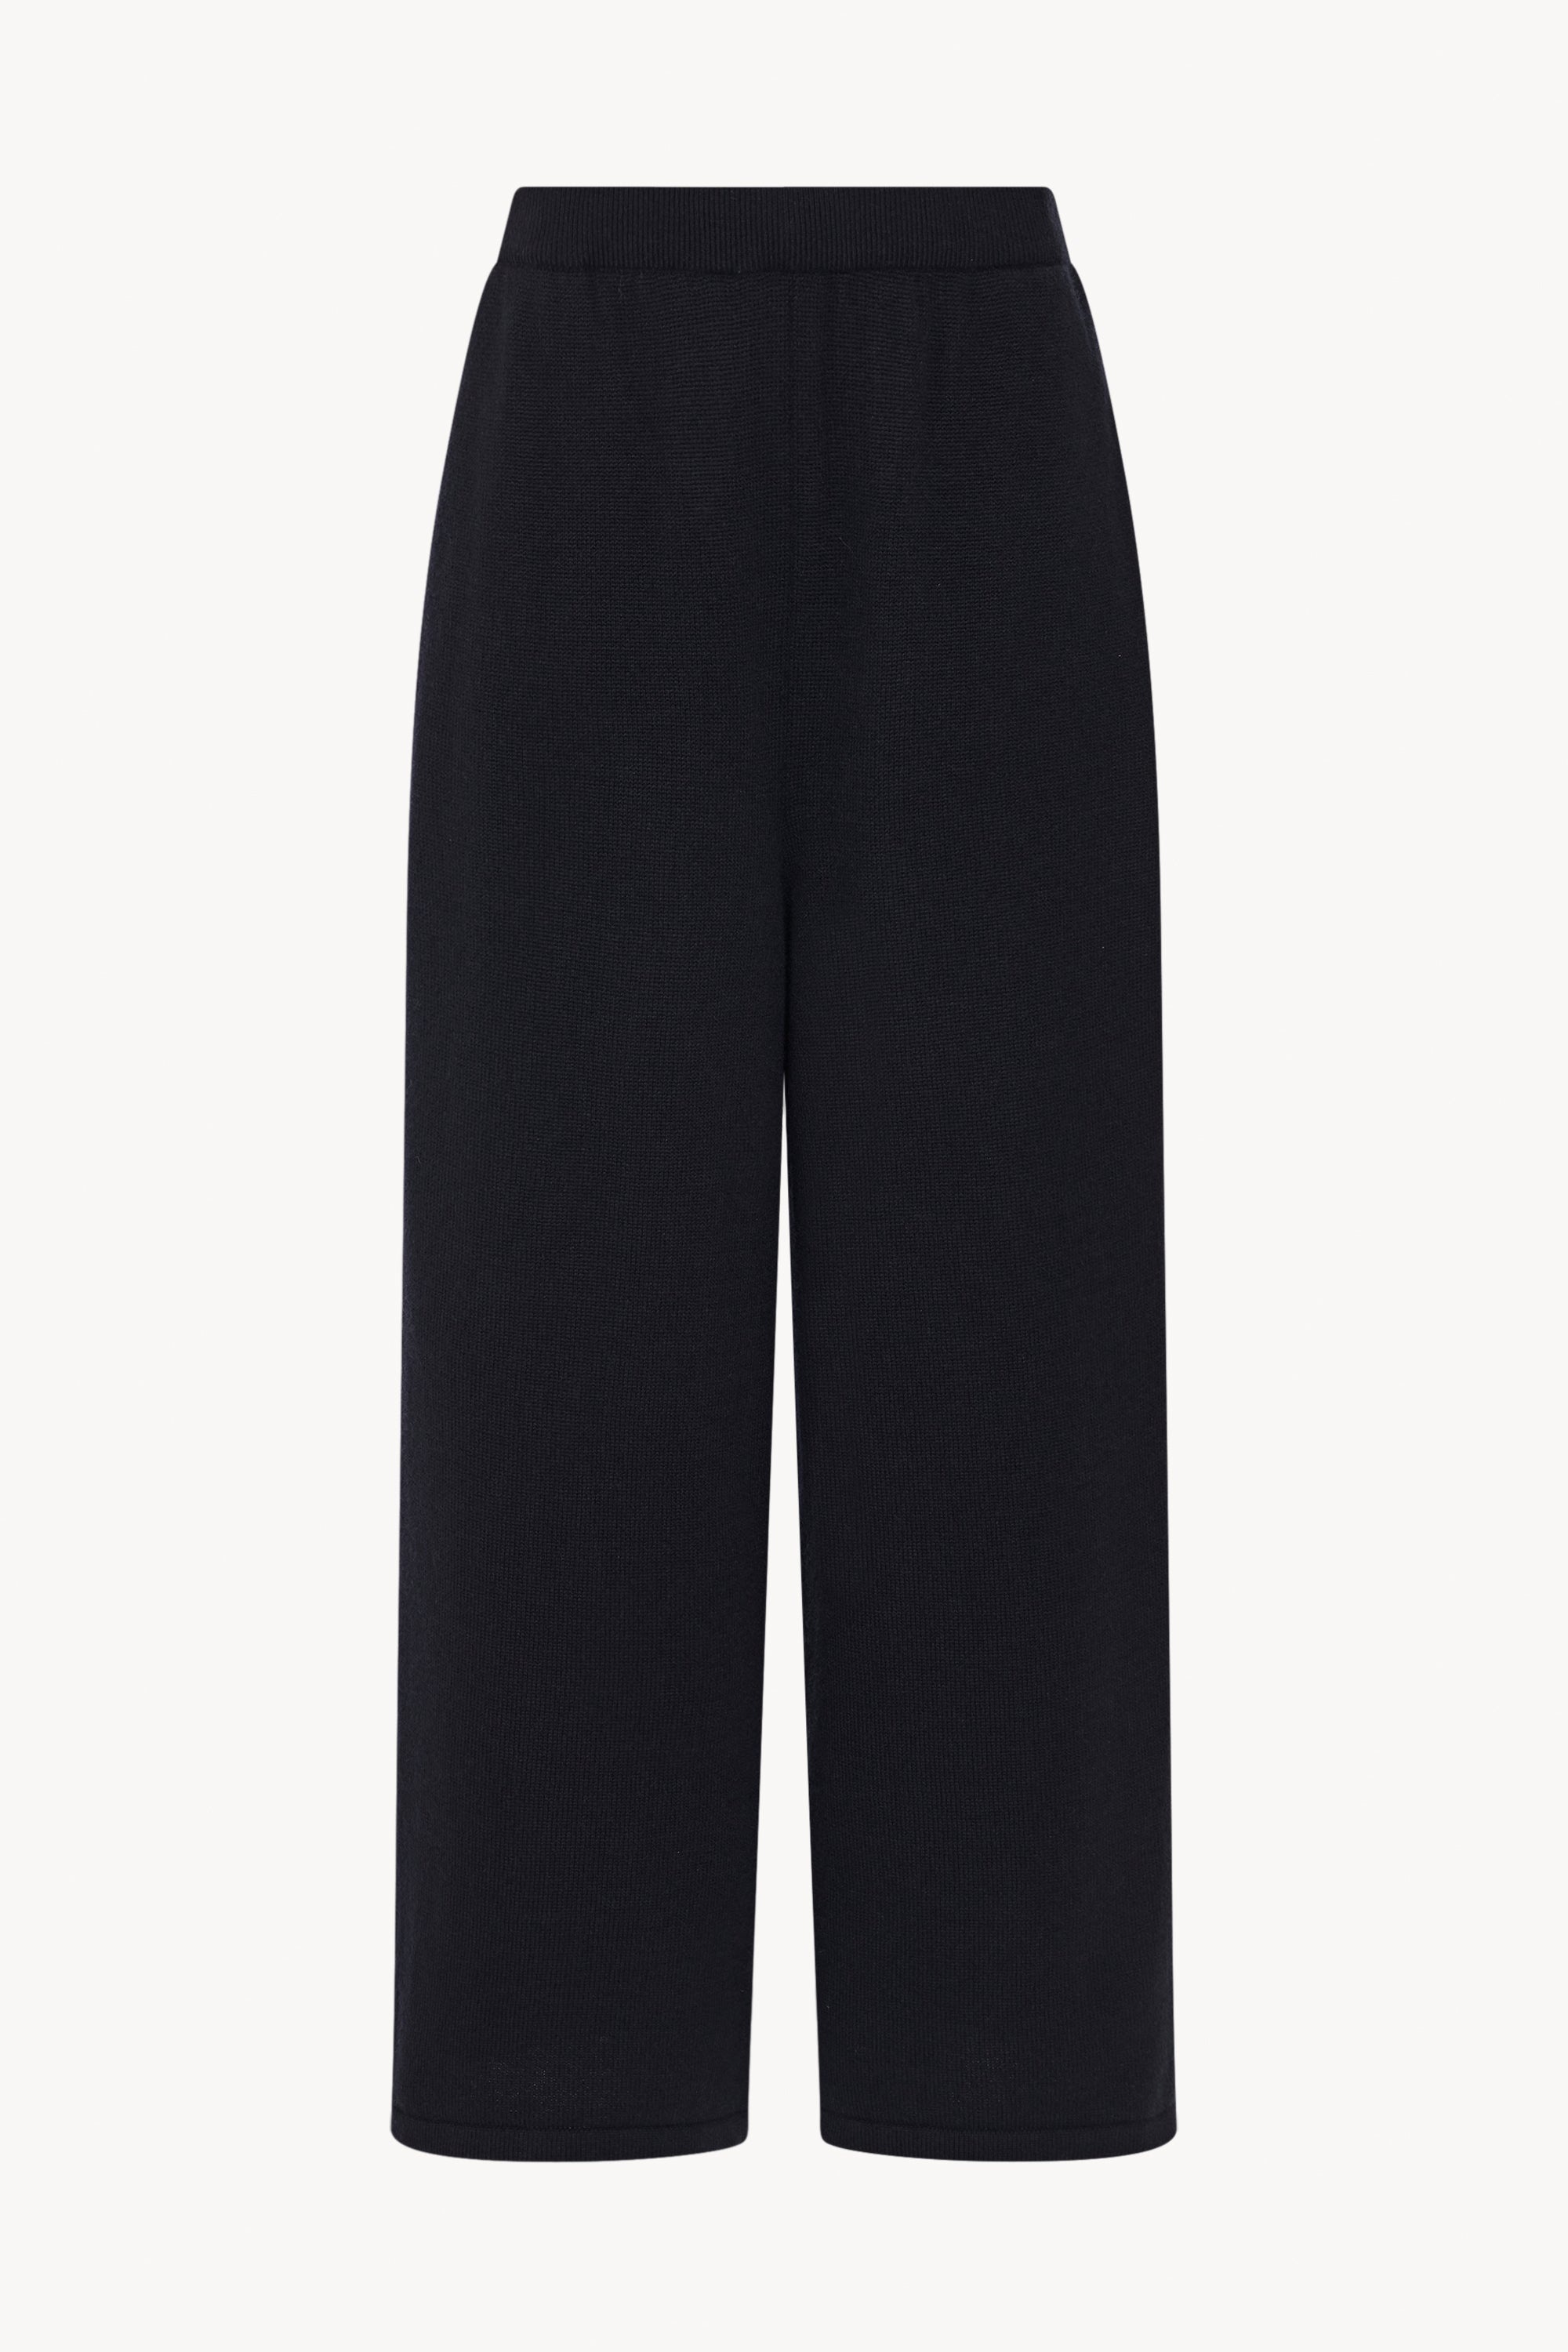 Eloisa Pants in Cashmere - 1